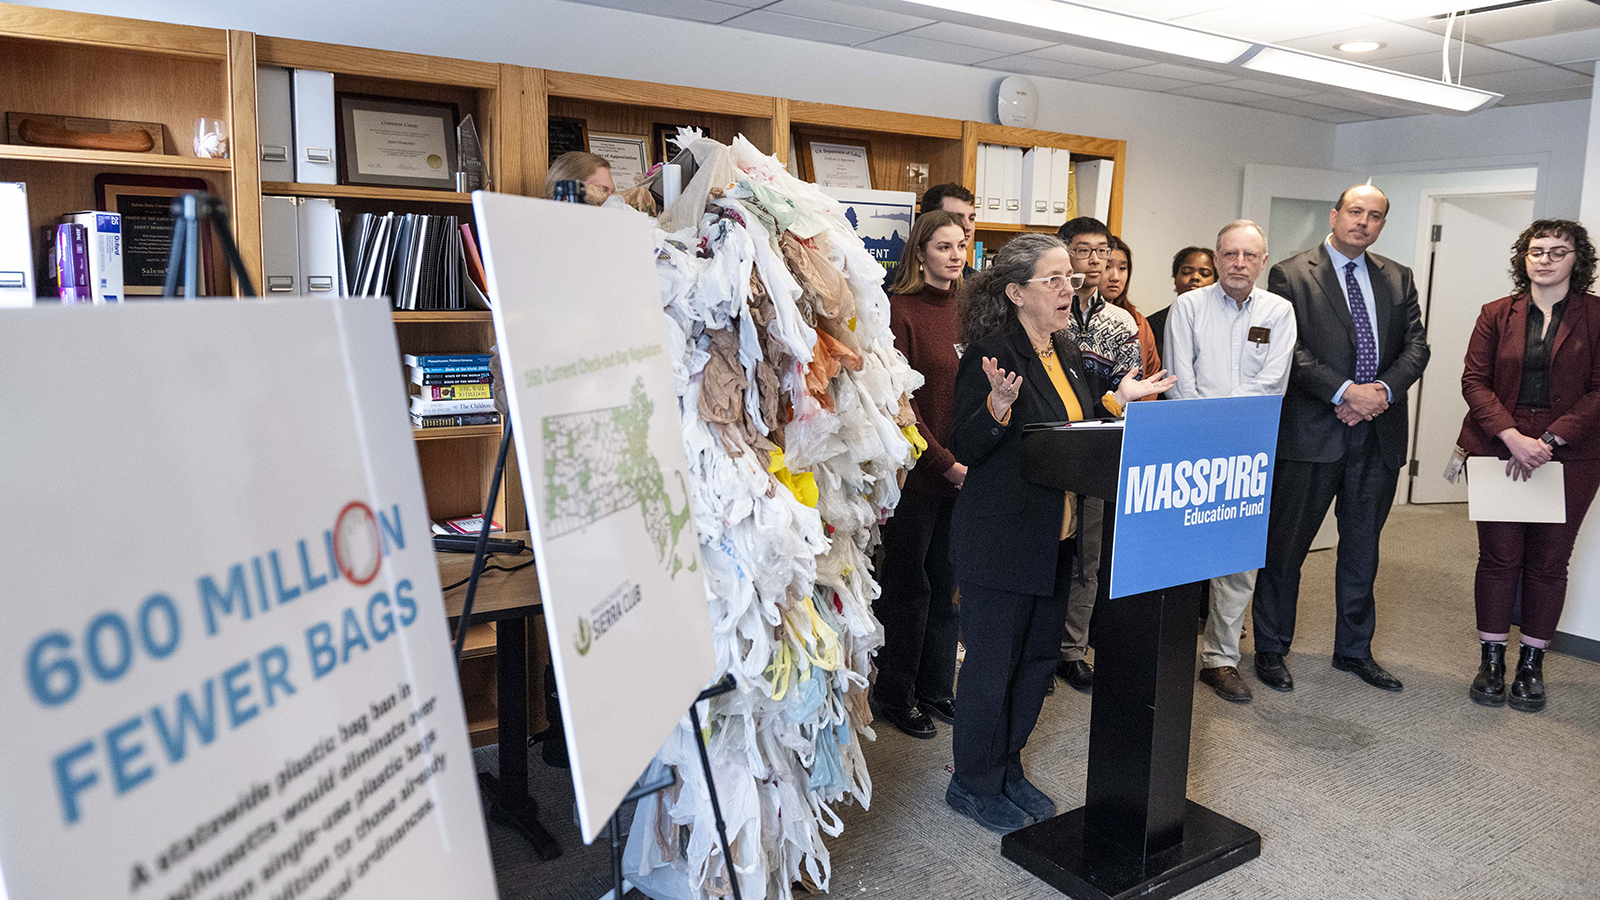 MASSPIRG’s Janet Domenitz is joined by Madison Latiolais of Community Action Works, Lydia Churchill of Environment Massachusetts, state Senator Jamie Eldridge, Alex Vai of Surfrider Foundation/MA, Clint Richmond of Sierra Club/MA, Grace Simmons from state Rep. Mindy Domb's office, and several Public Interest Network canvassers at the release of the new report: Plastic Bag Bans Work.